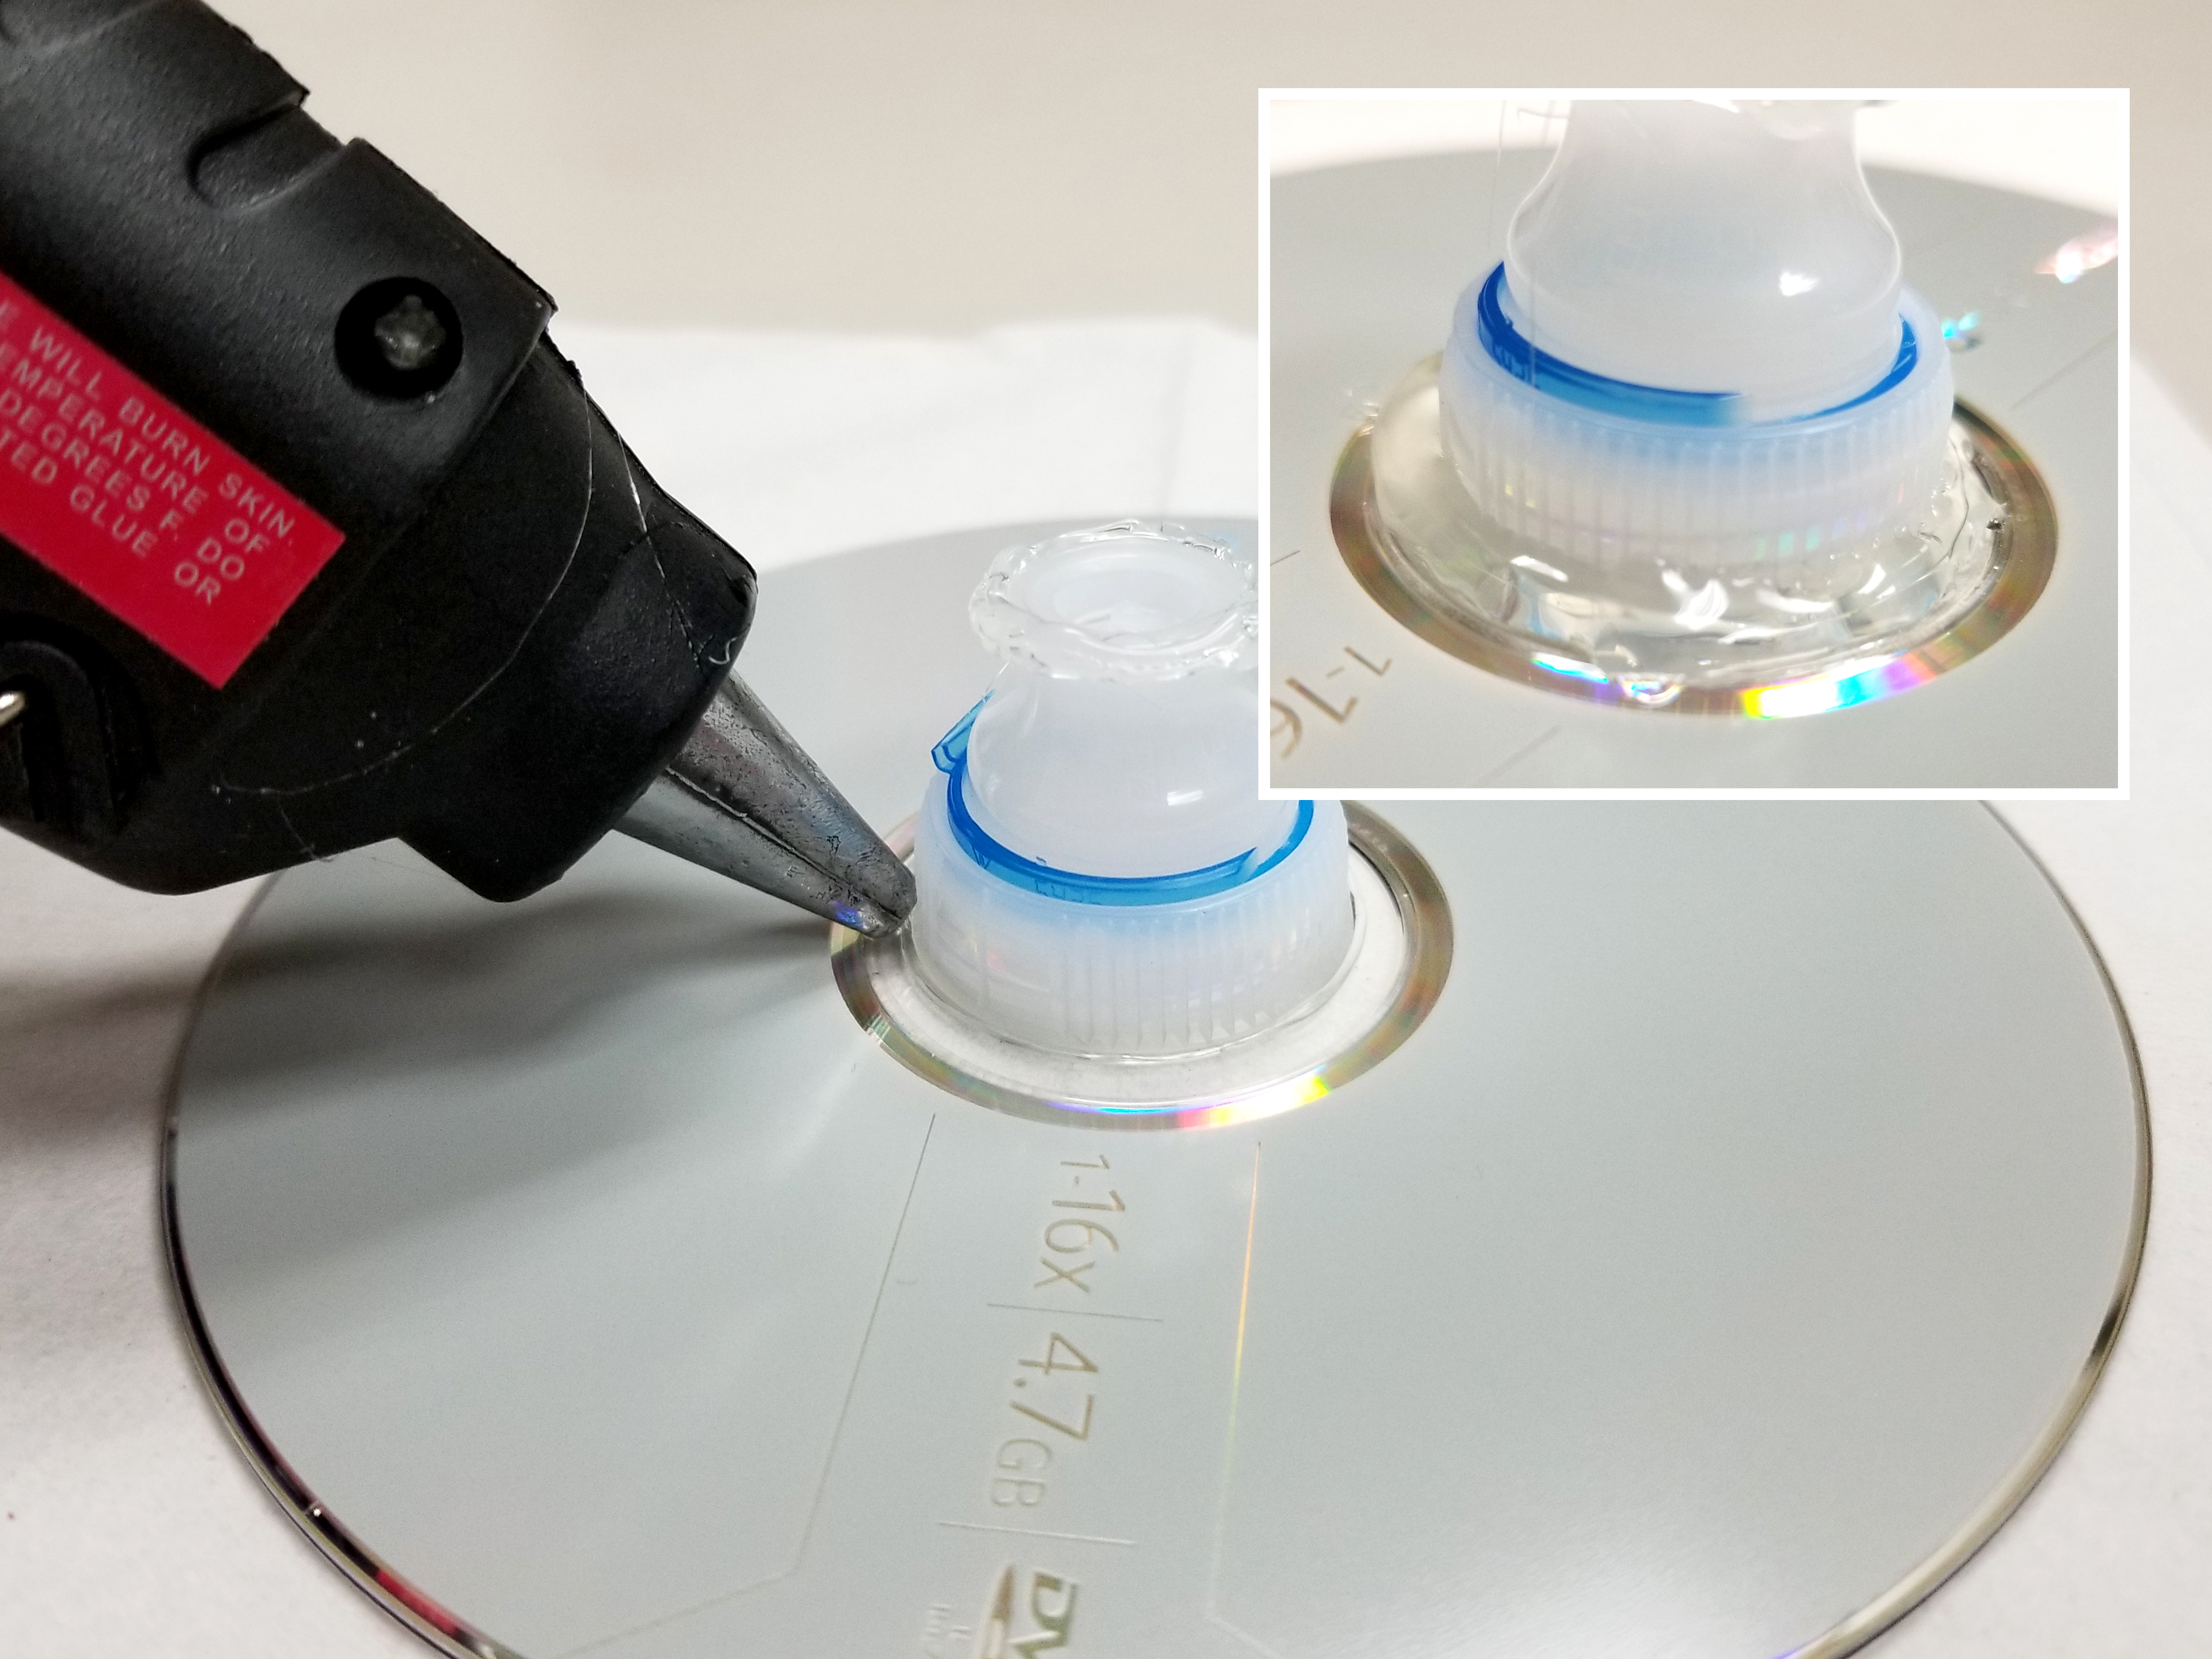 Adding more glue where water bottle top meets CD